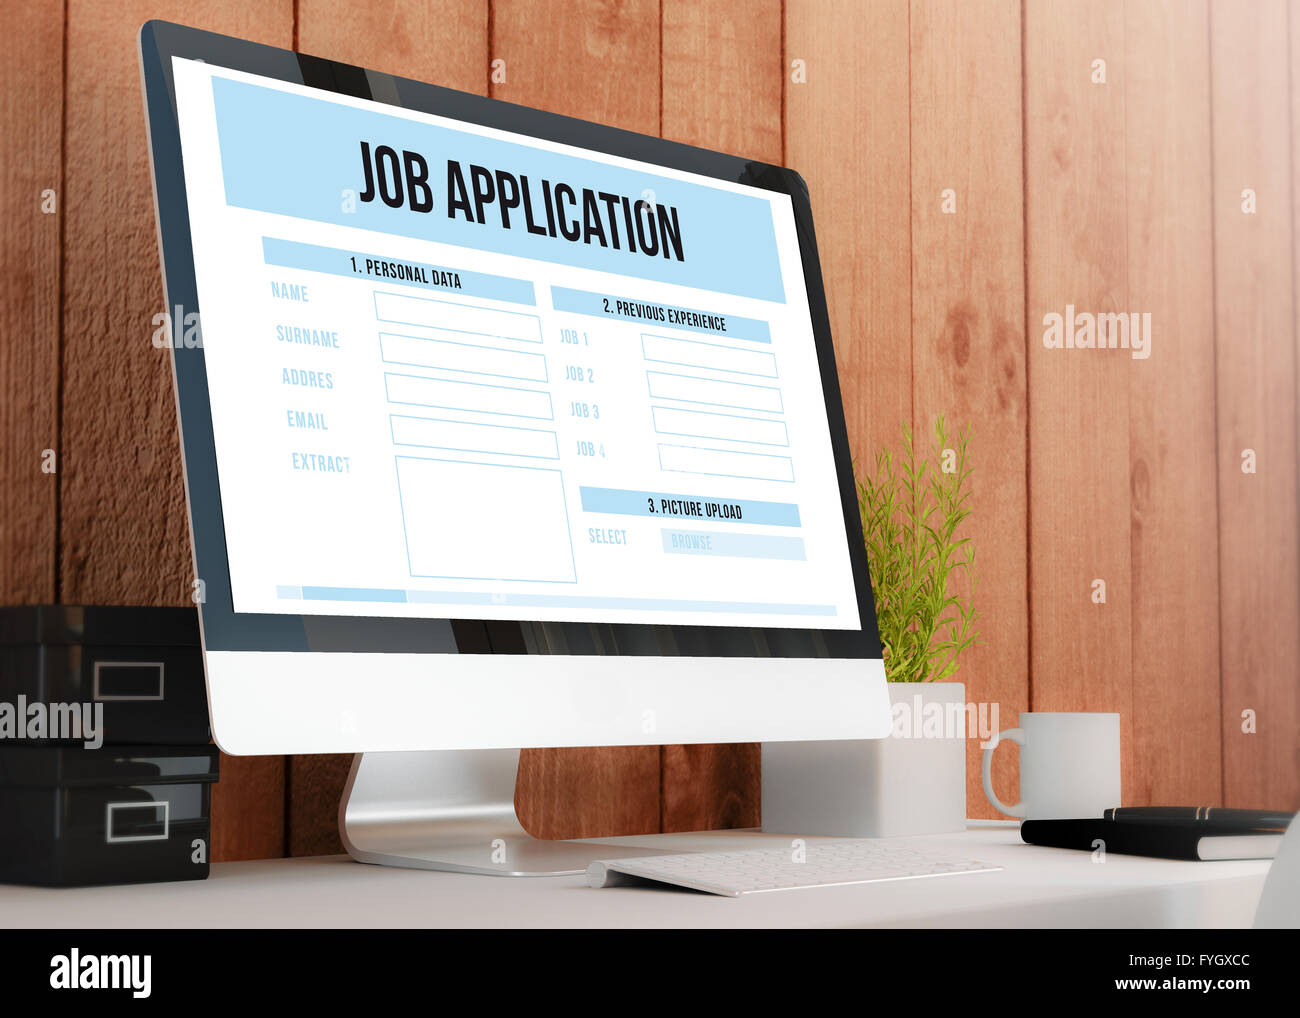 modern wooden workspace with computer showing job application. All screen graphics are made up. 3D illustration. Stock Photo